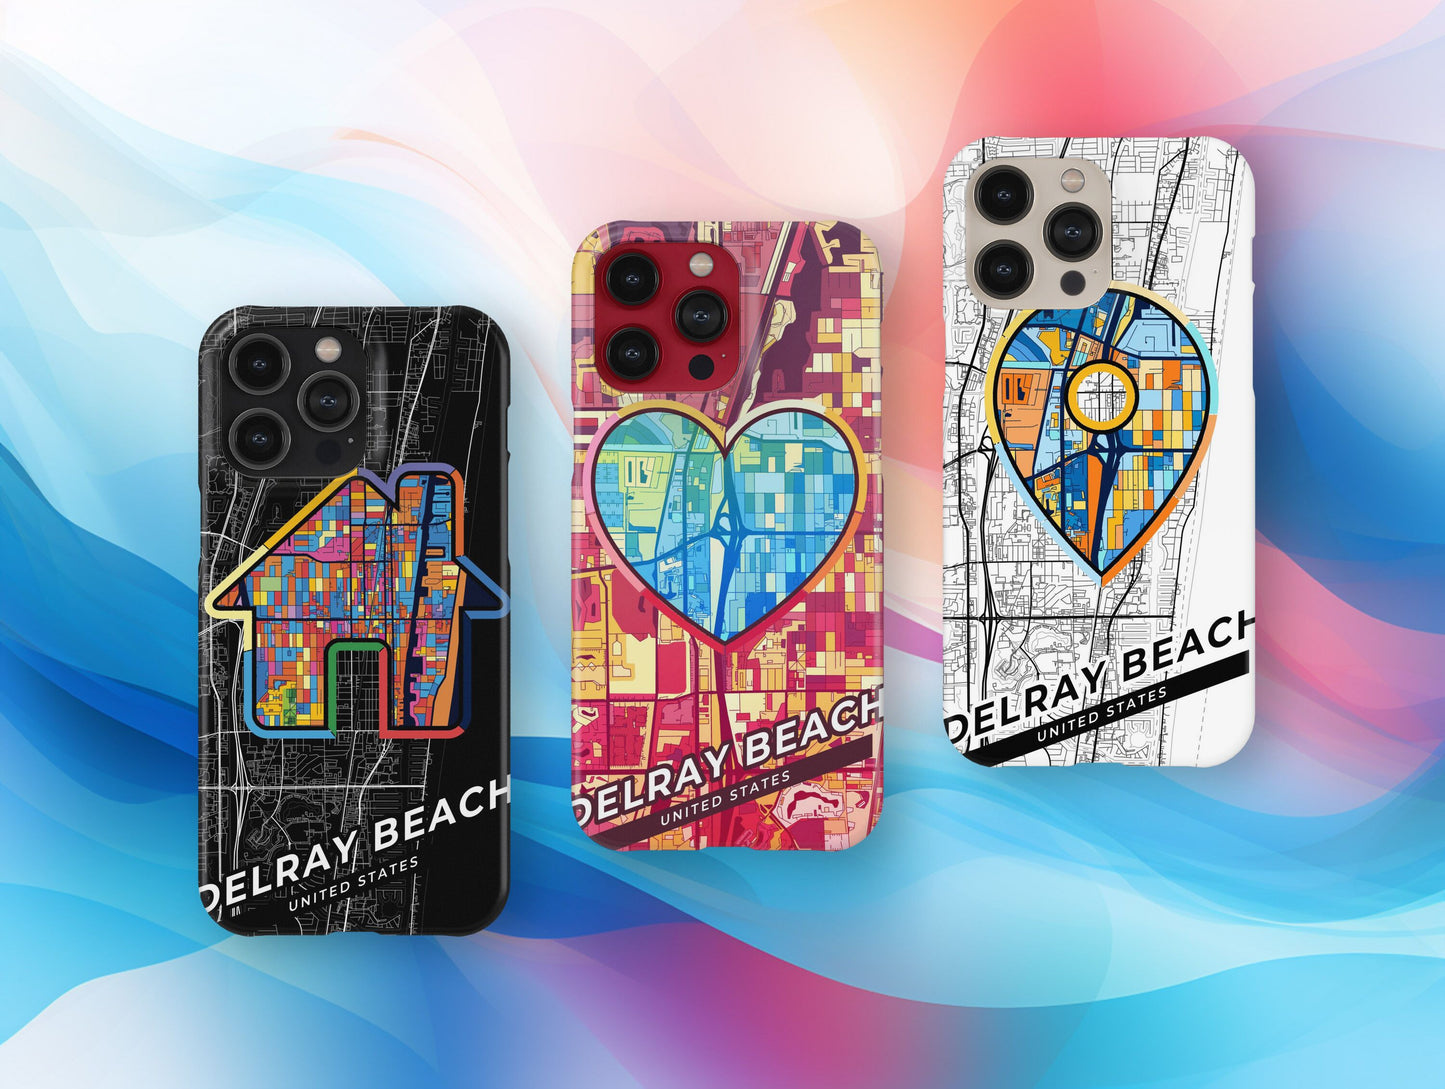 Delray Beach Florida slim phone case with colorful icon. Birthday, wedding or housewarming gift. Couple match cases.